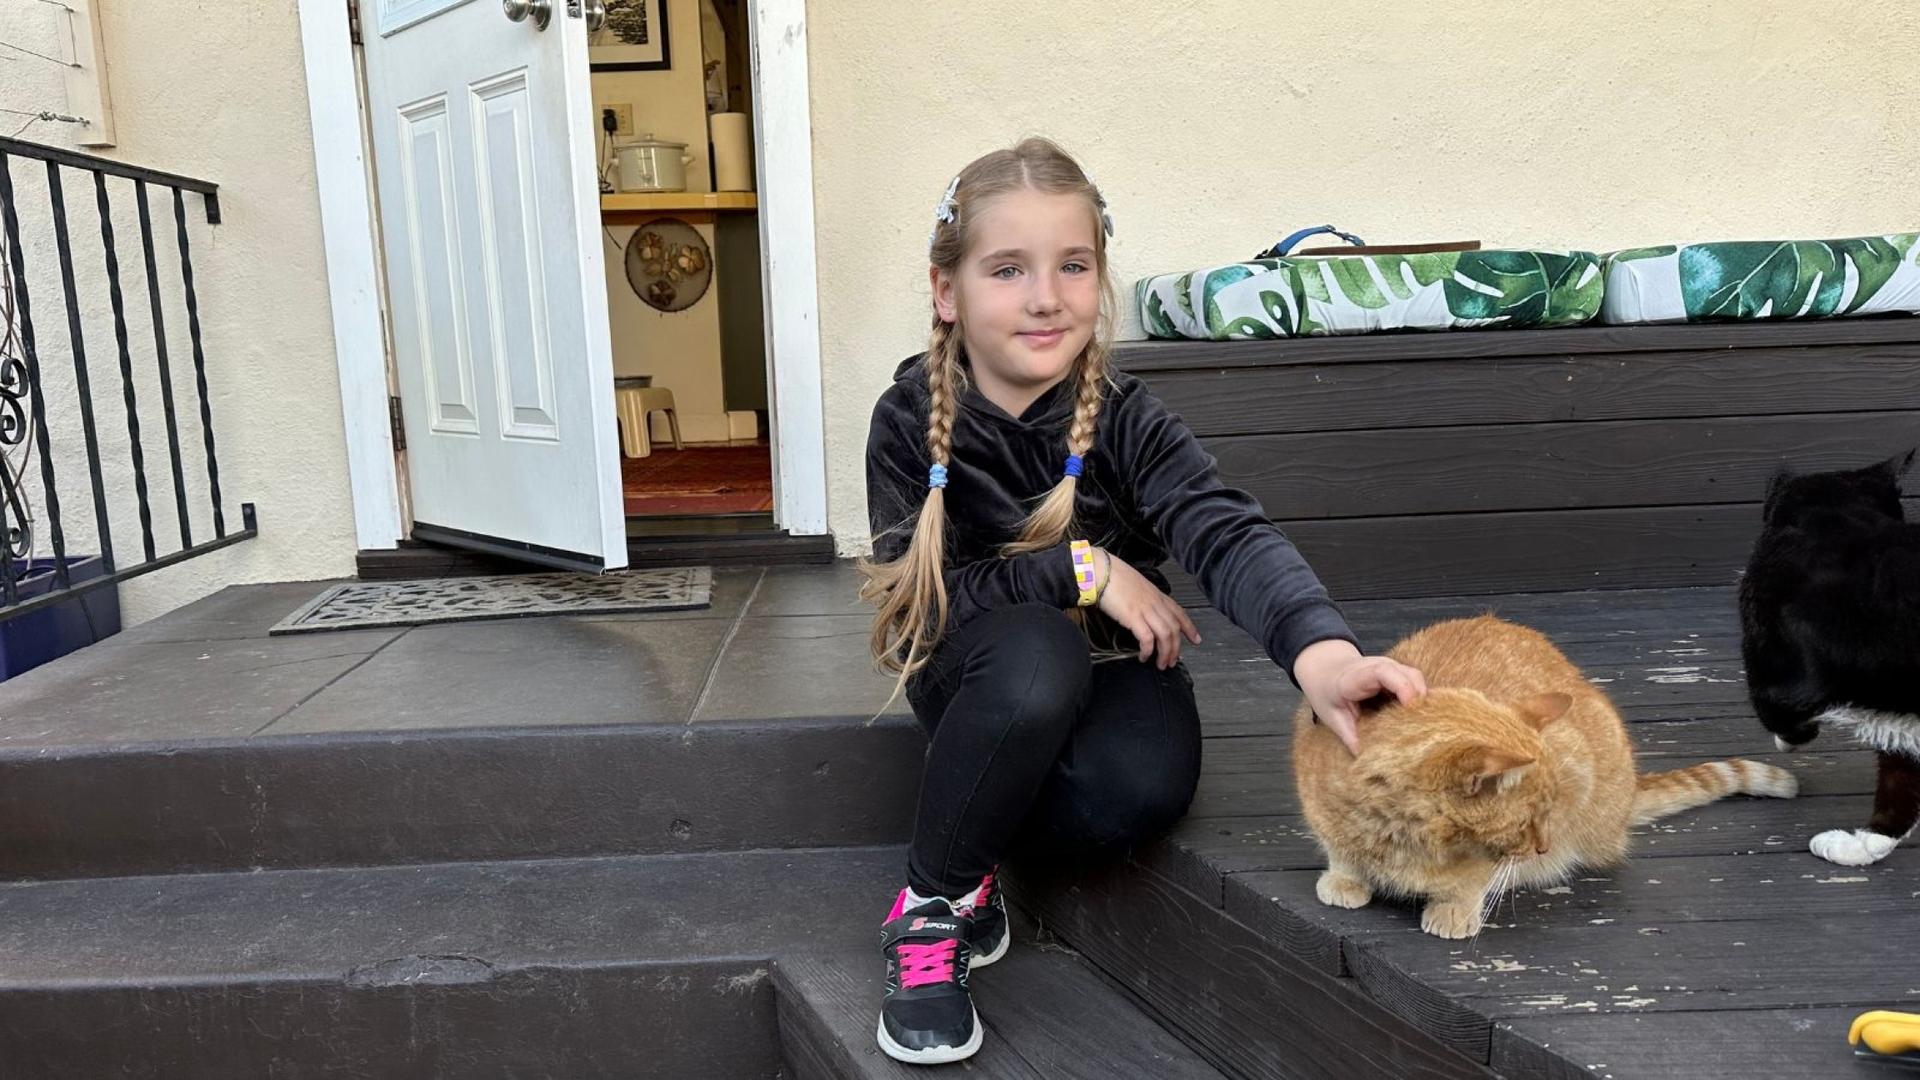 Vira Ustyanska's daughter Vasy plays with a cat in what is now her home in San Diego, California. Mother and daughter fled their town of Zaporizhzhia in the first weeks of the war in Ukraine.